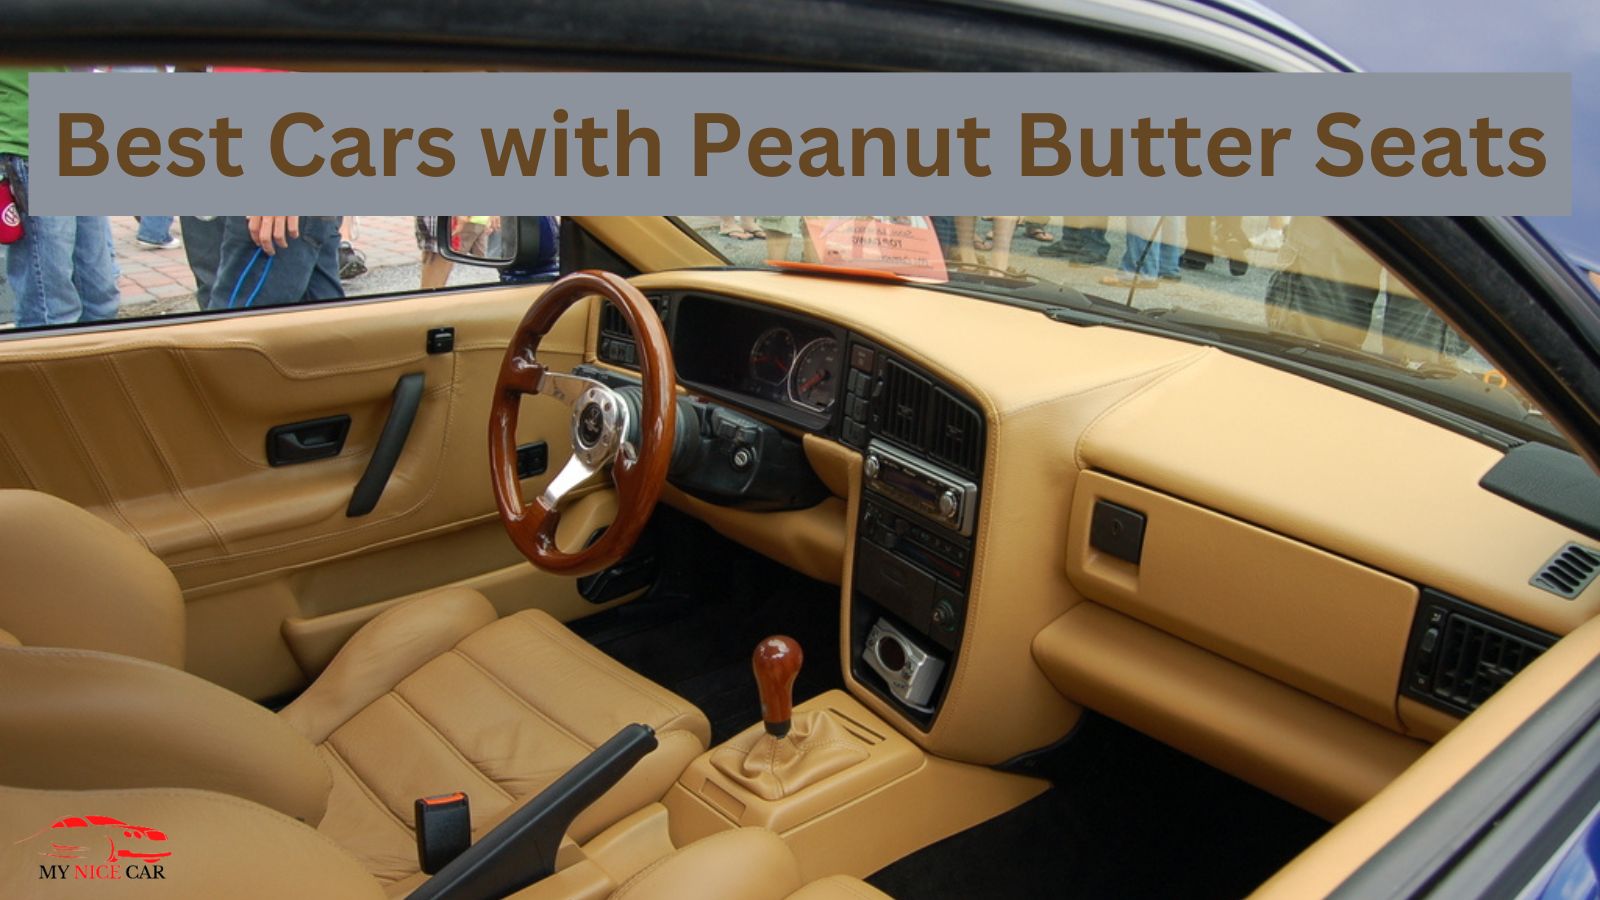 You are currently viewing 7 Best Cars with Peanut Butter Seats: The Top Contenders